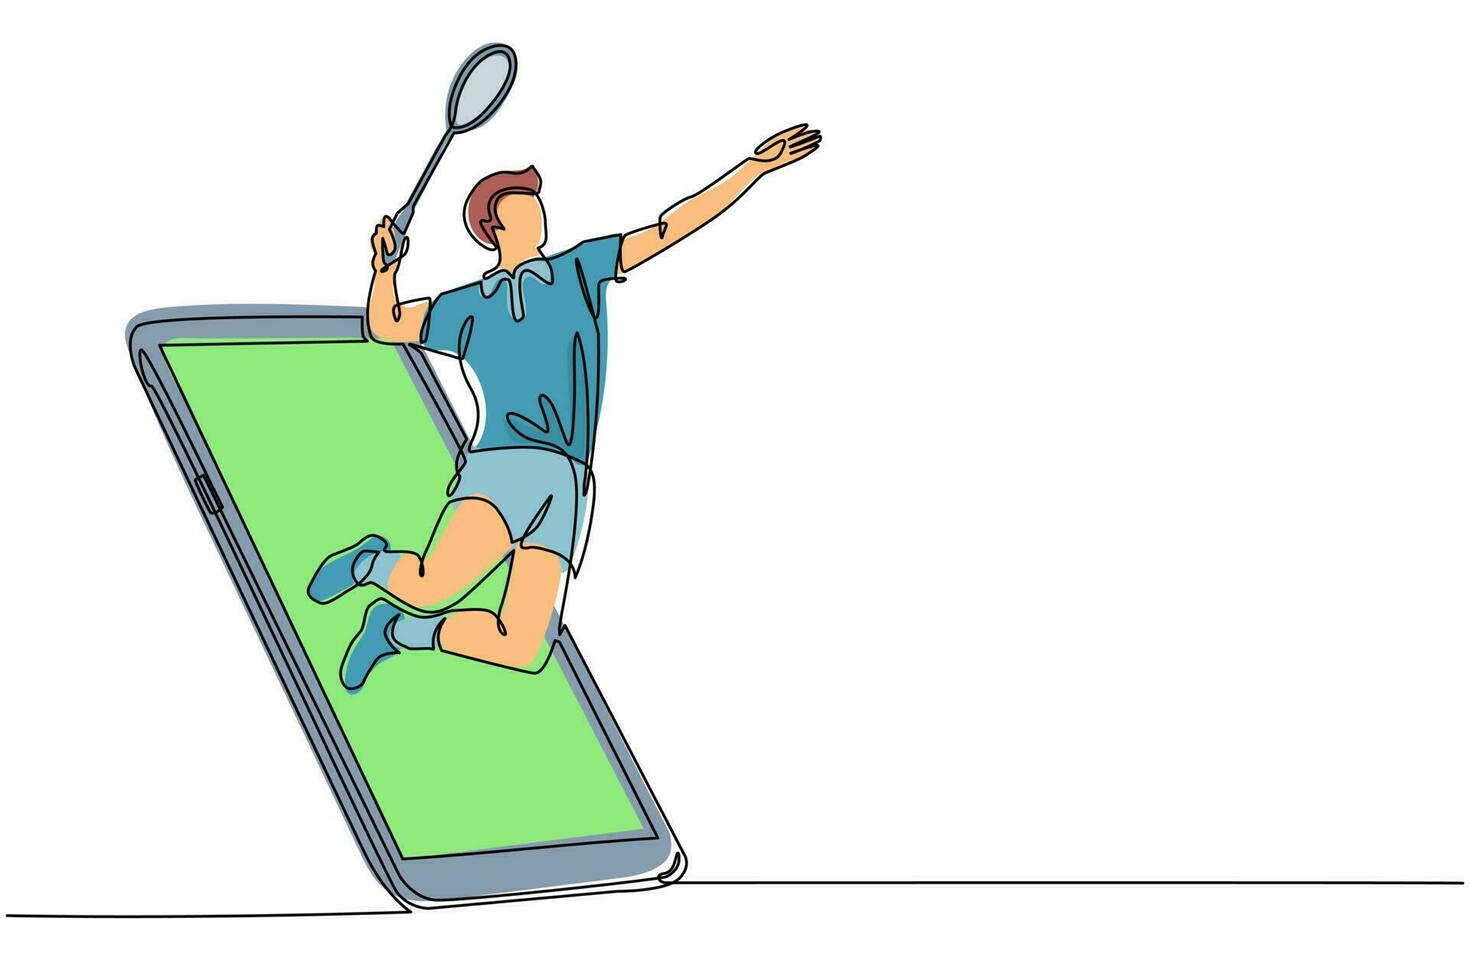 Single one line drawing man badminton player jump hit shuttlecock getting out of smartphone screen